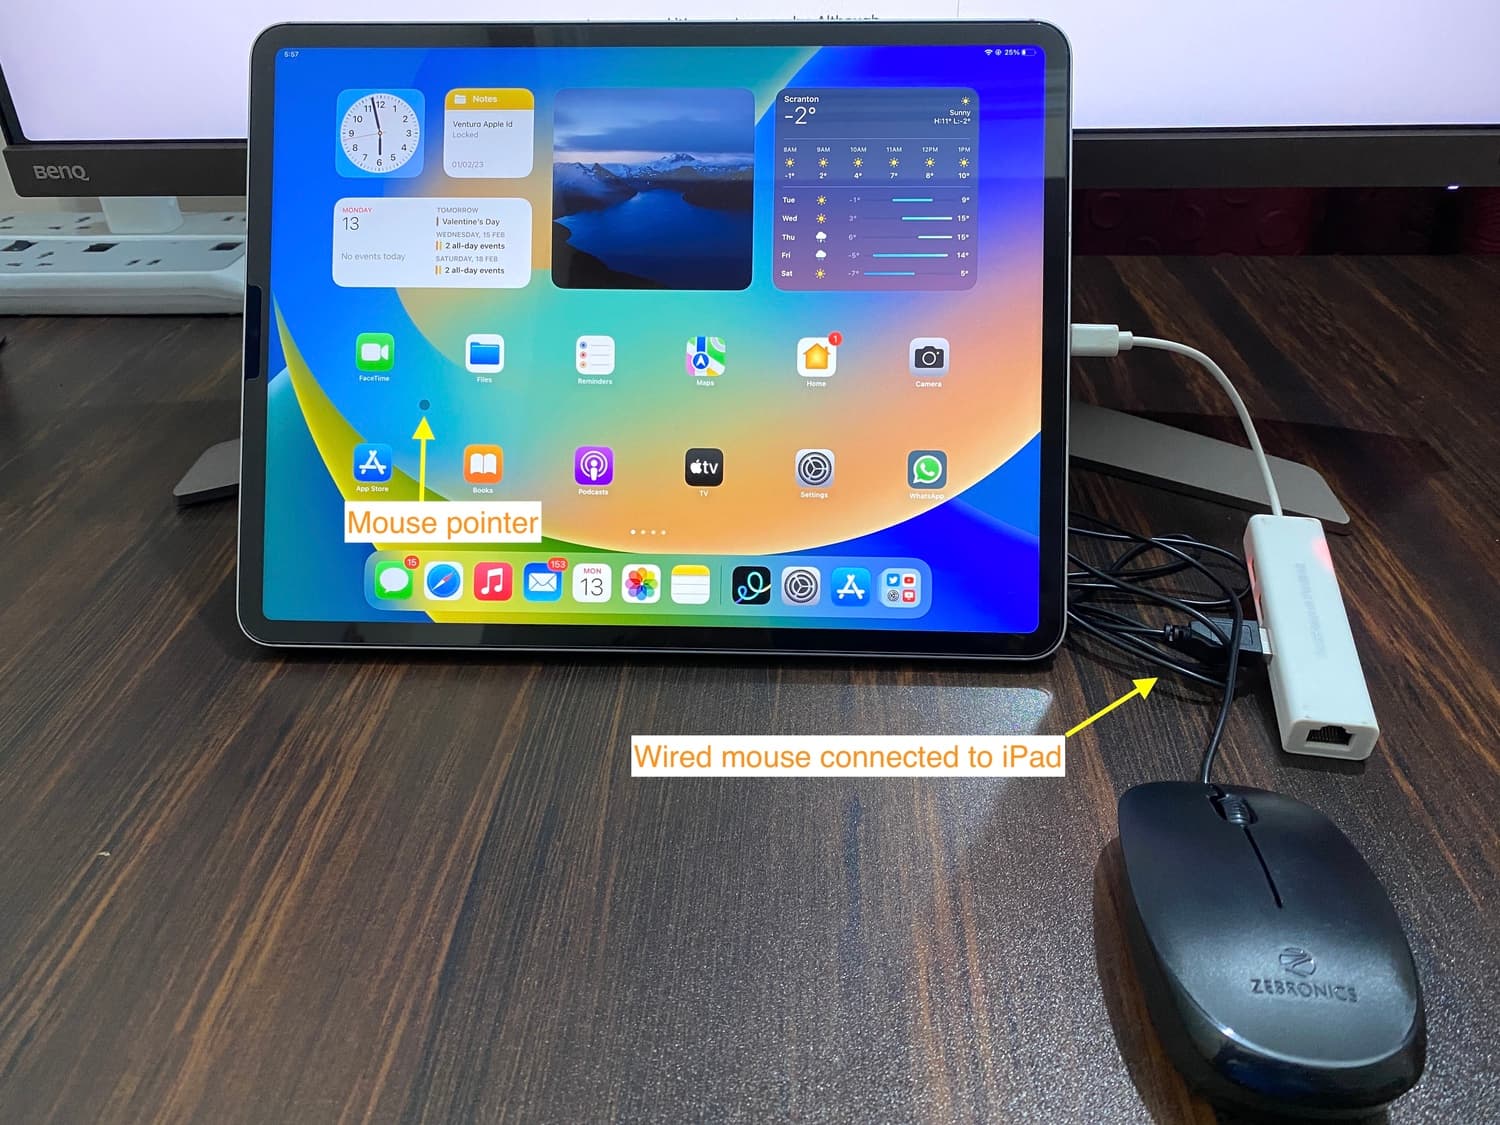 Wired mouse connected to iPad